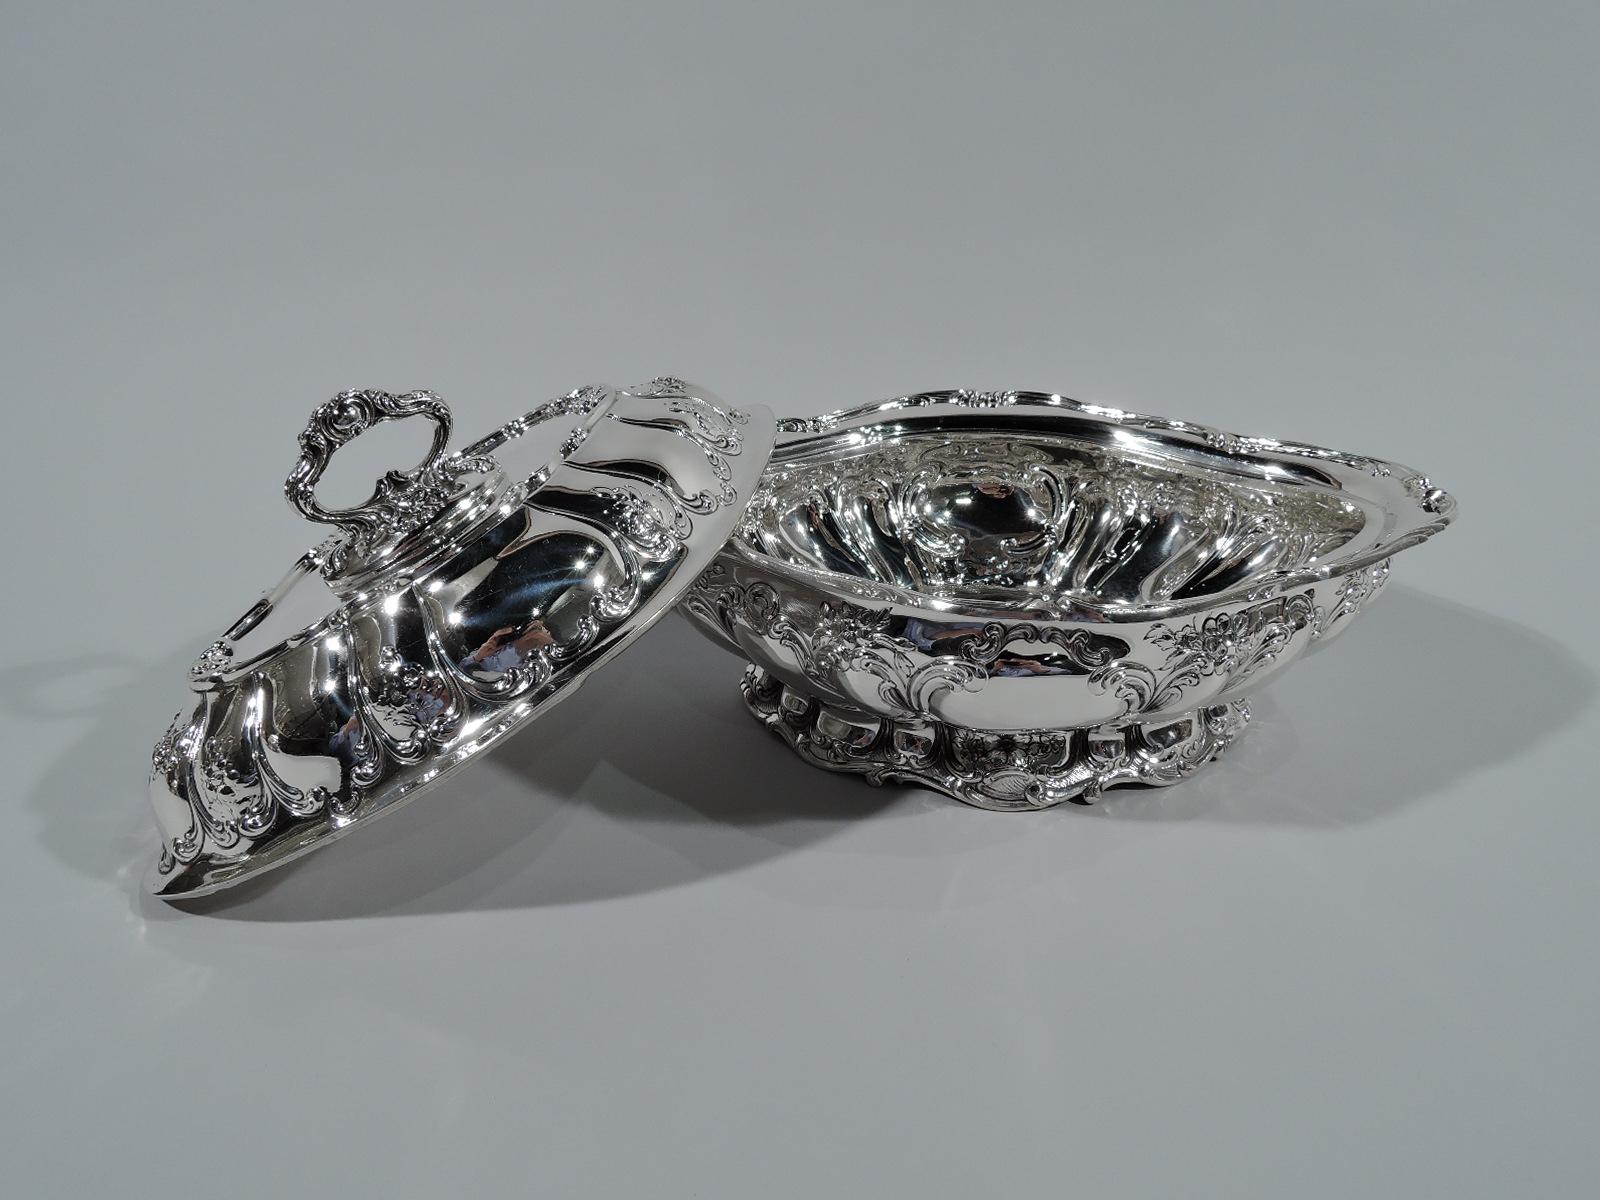 American Pair of Gorham Chantilly Sterling Silver Covered Vegetable Dishes